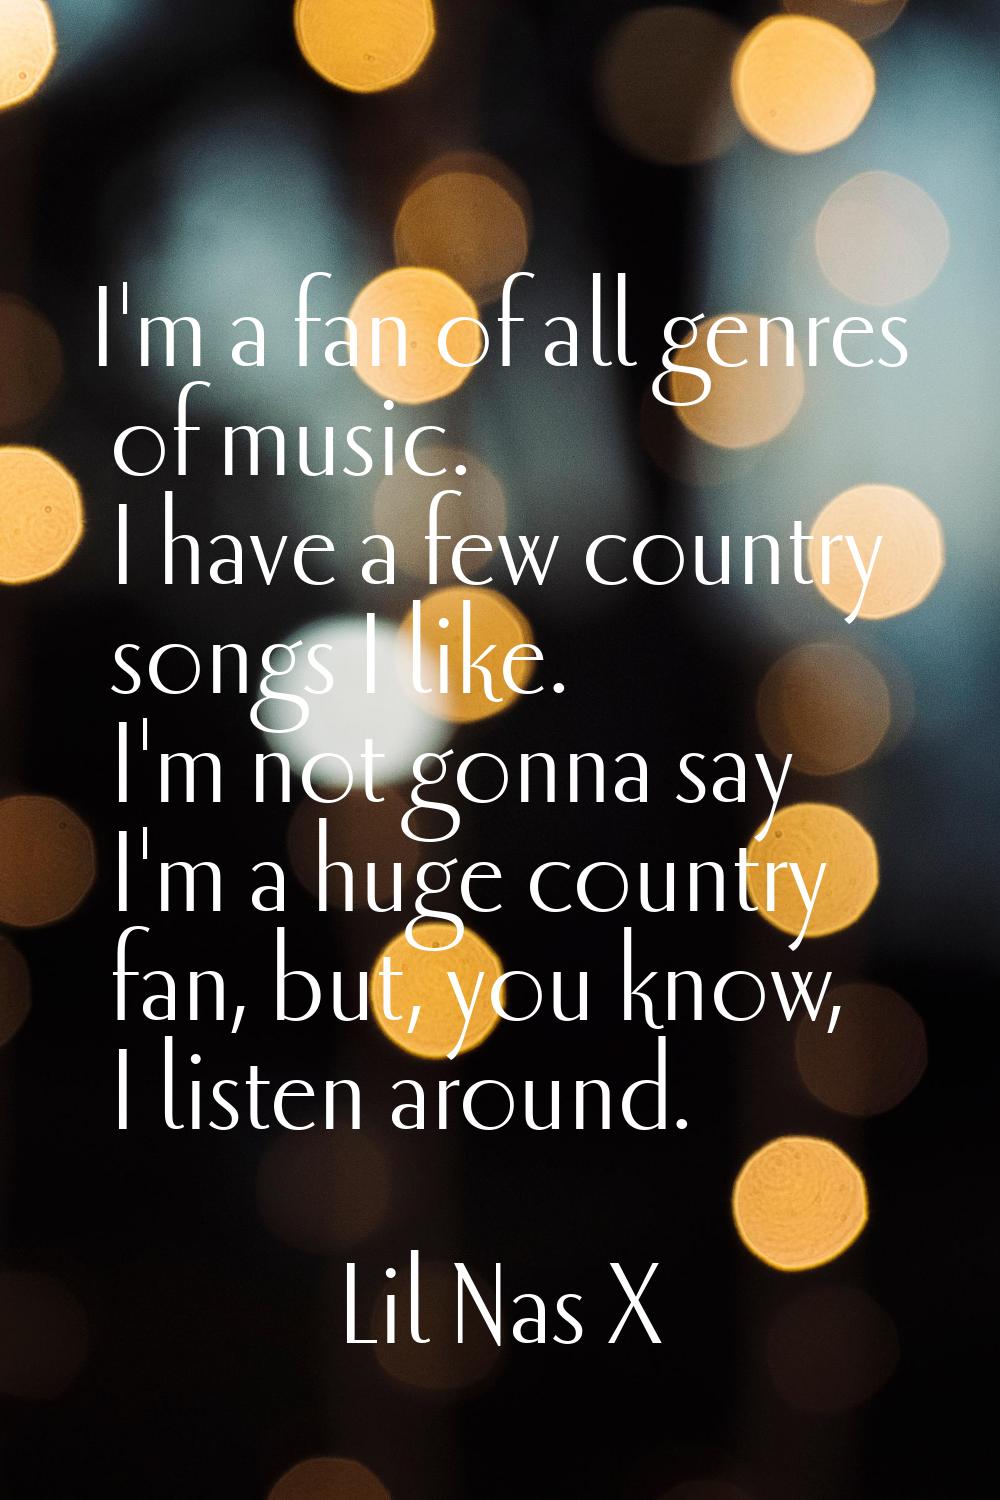 I'm a fan of all genres of music. I have a few country songs I like. I'm not gonna say I'm a huge c